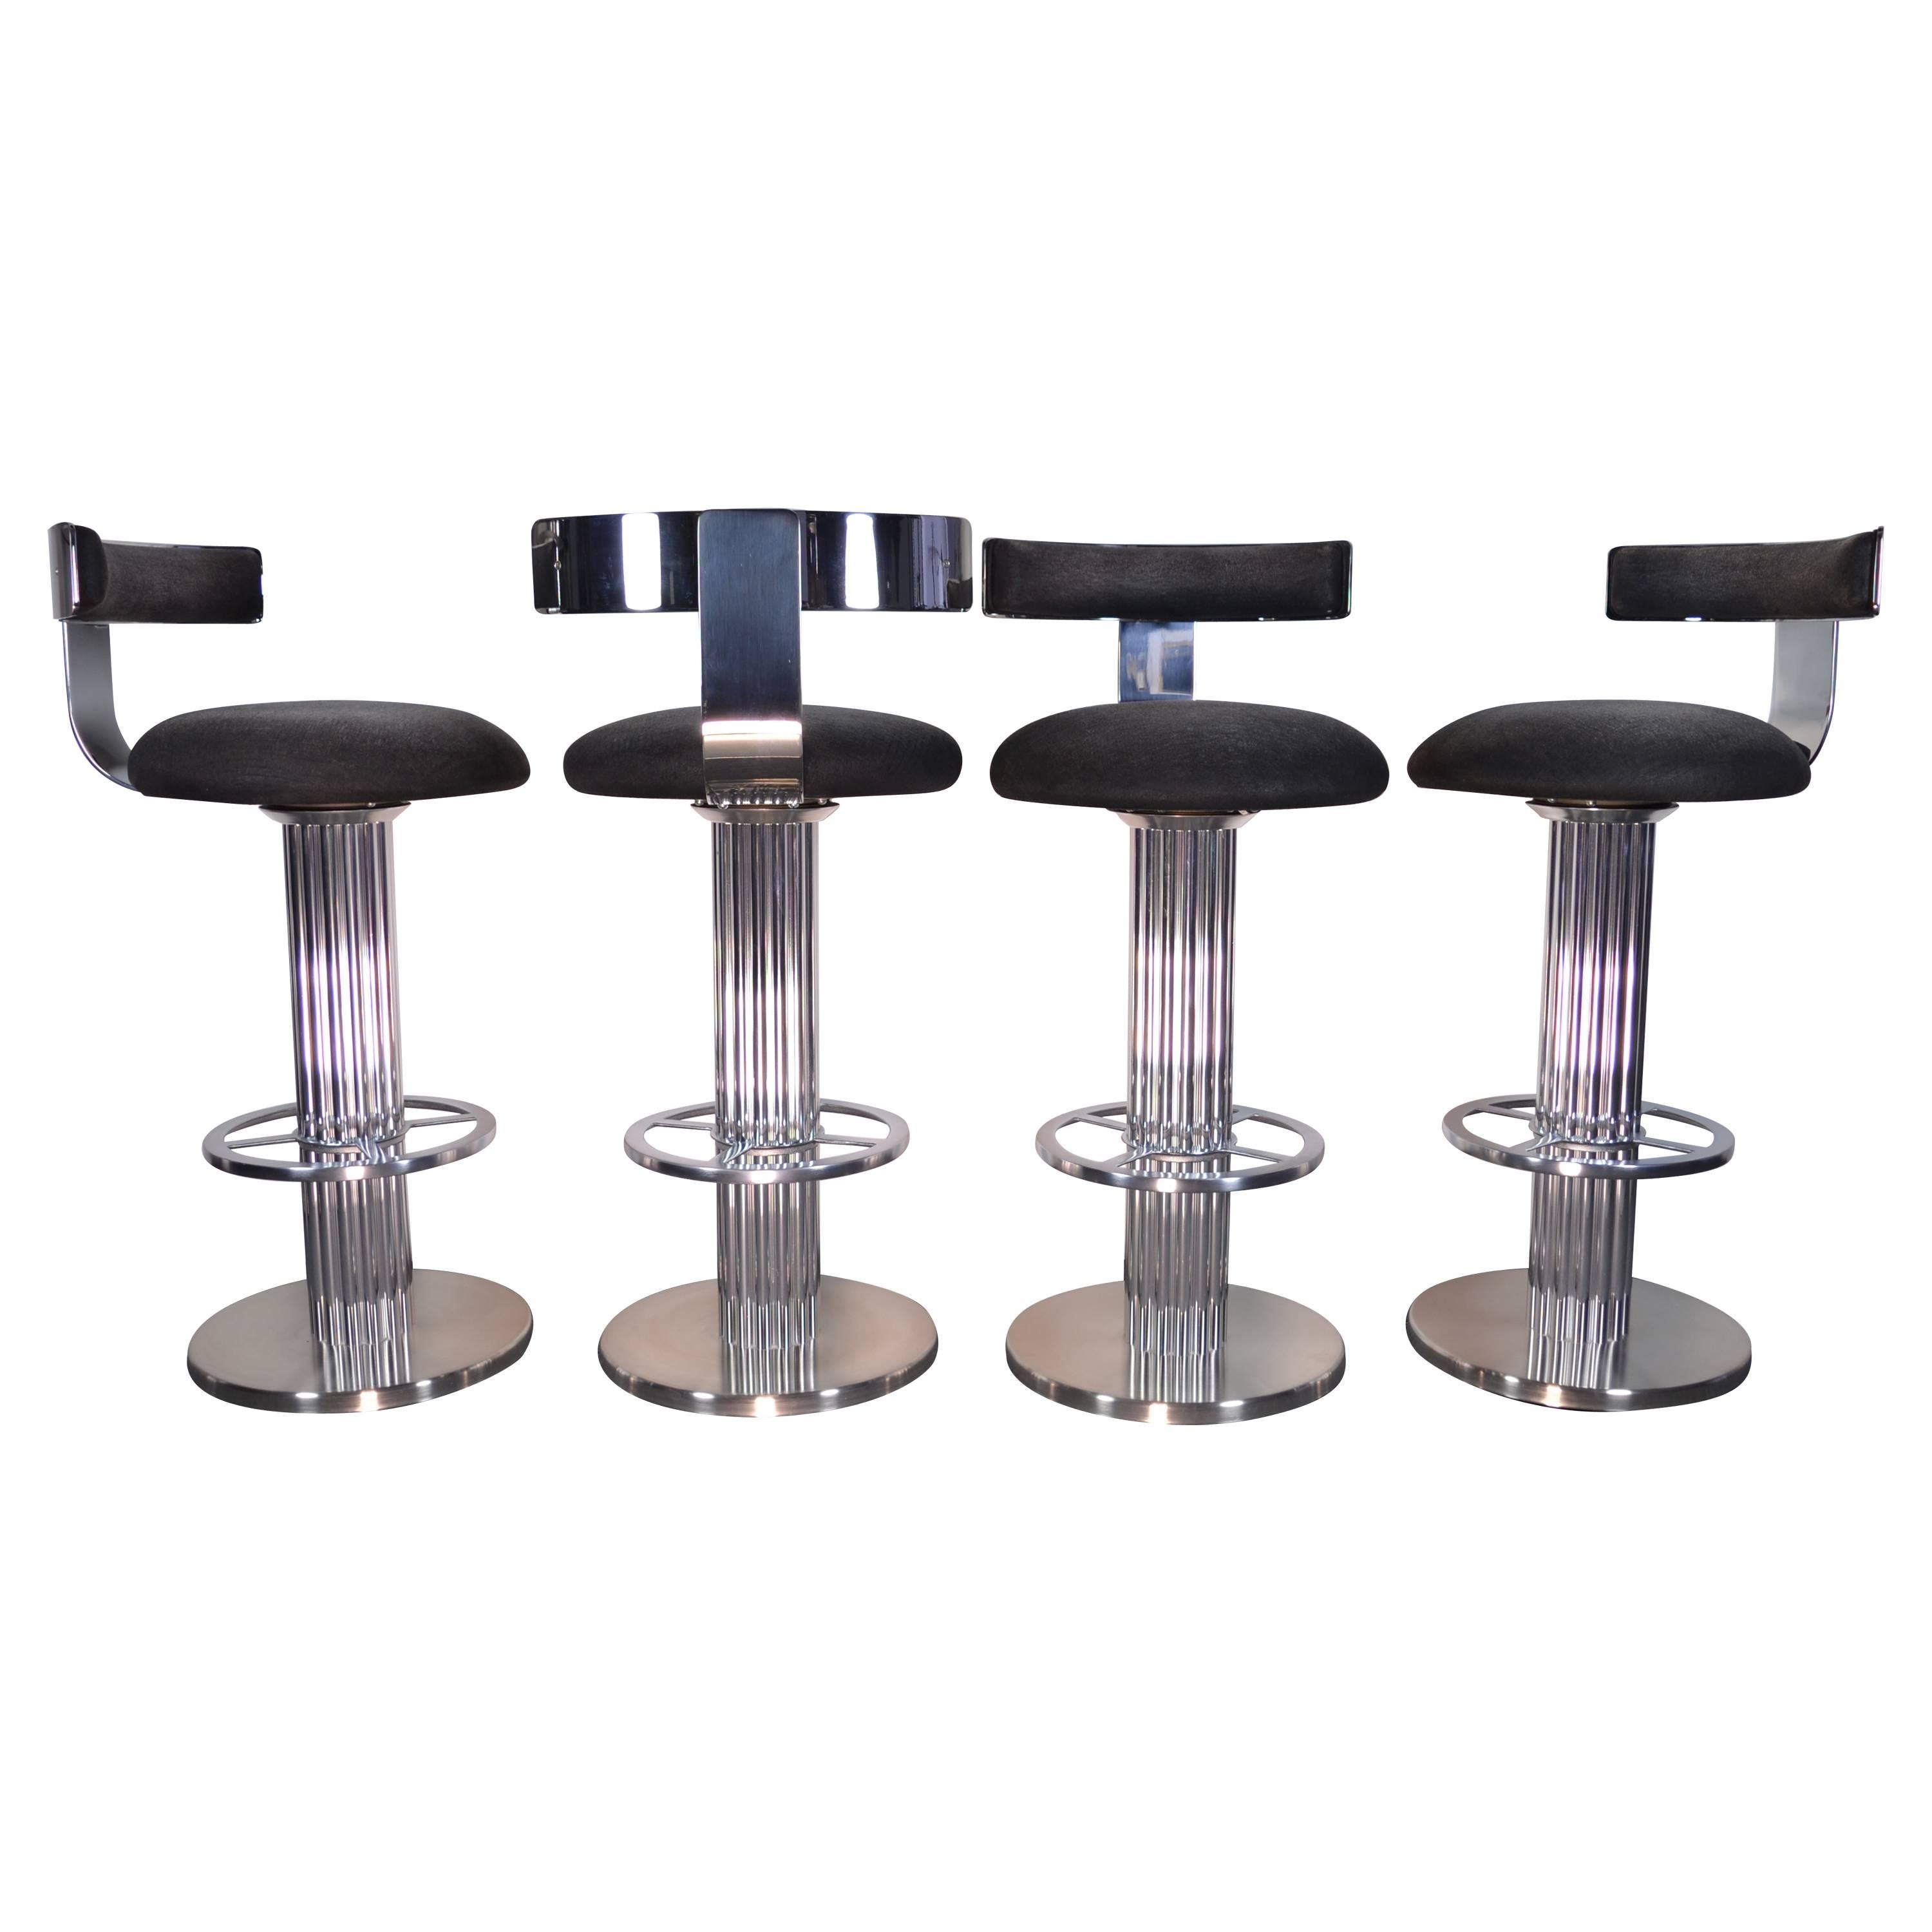 Set of Four Swivel Barstools by Designs for Leisure, circa 1980s